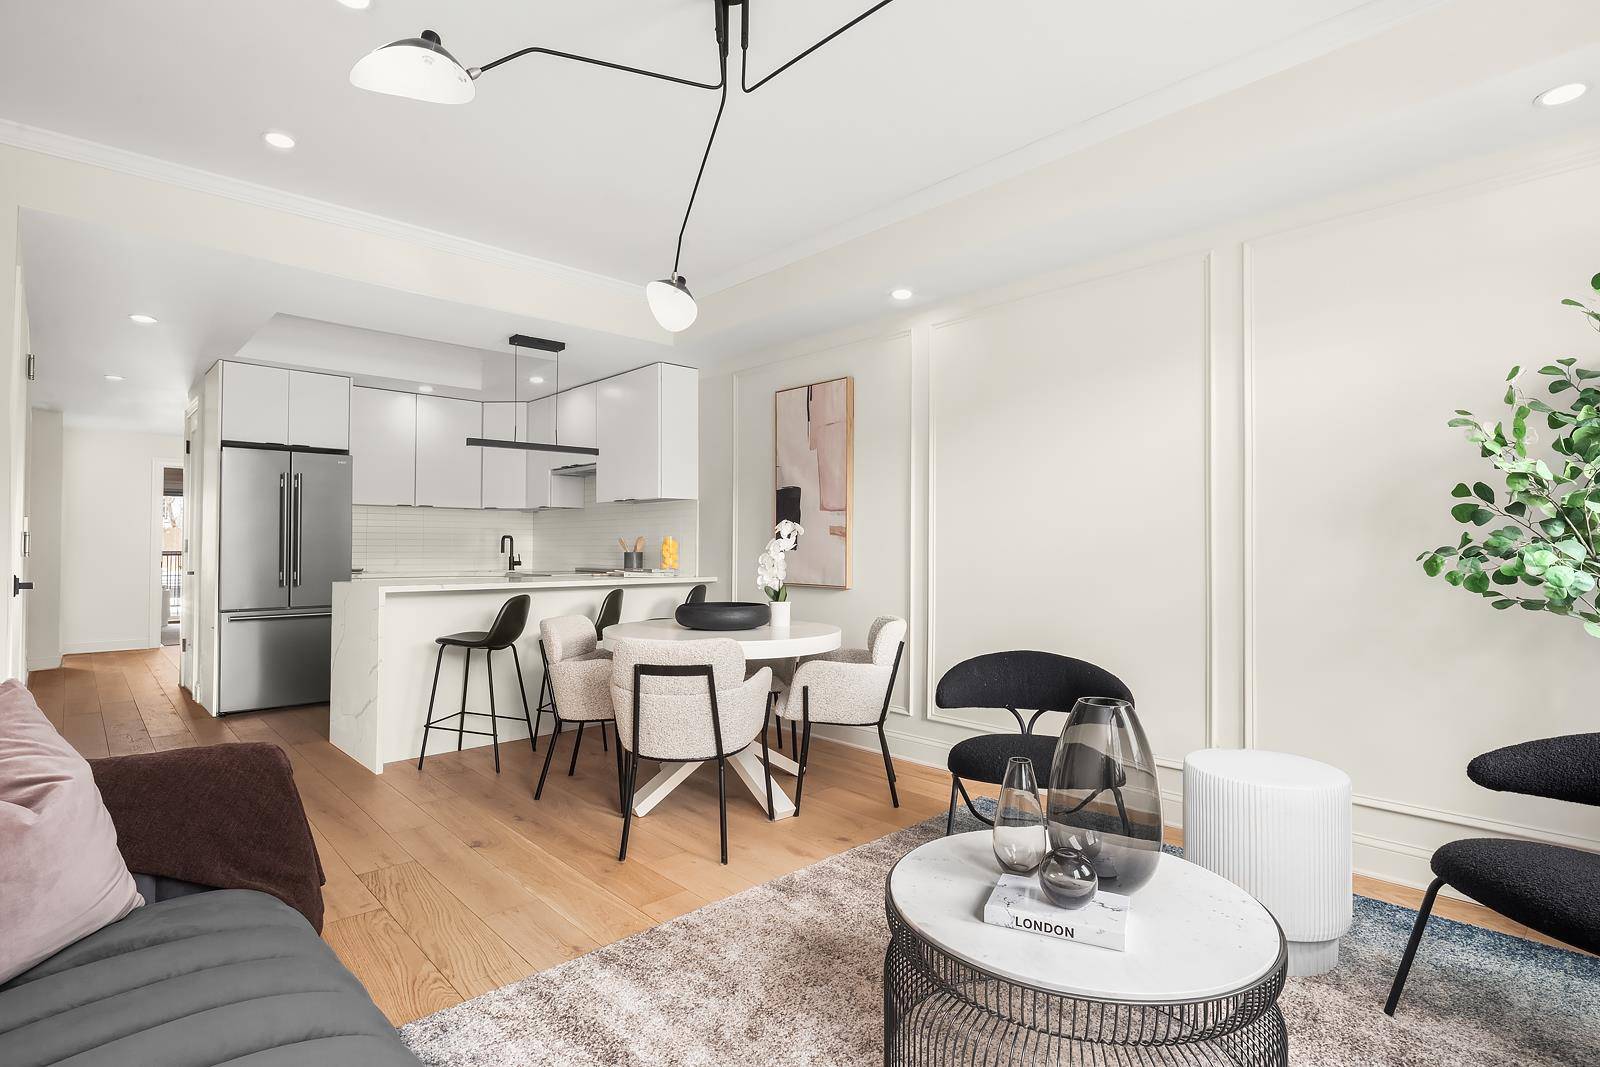 IMMEDIATE OCCUPANCY ! Welcome to 657 Baltic Street, Park Slop's newest boutiquecondominiums nestled on one of the most convenient, centrally located blocks inthe neighborhood.